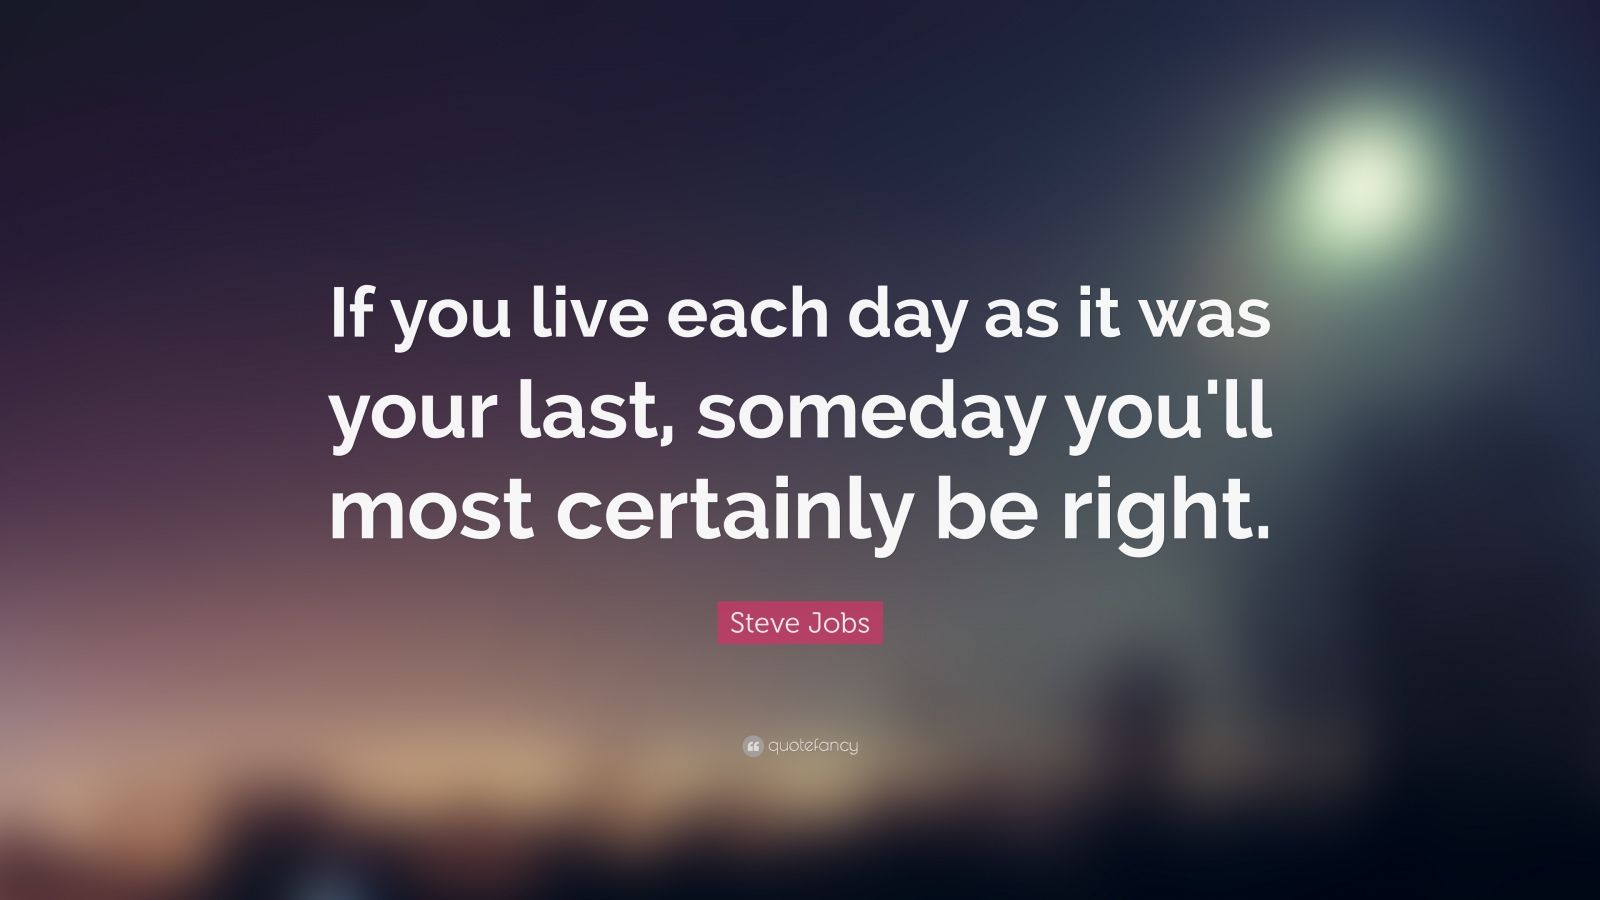 Steve Jobs Quote: “If you live each day as it was your last, someday